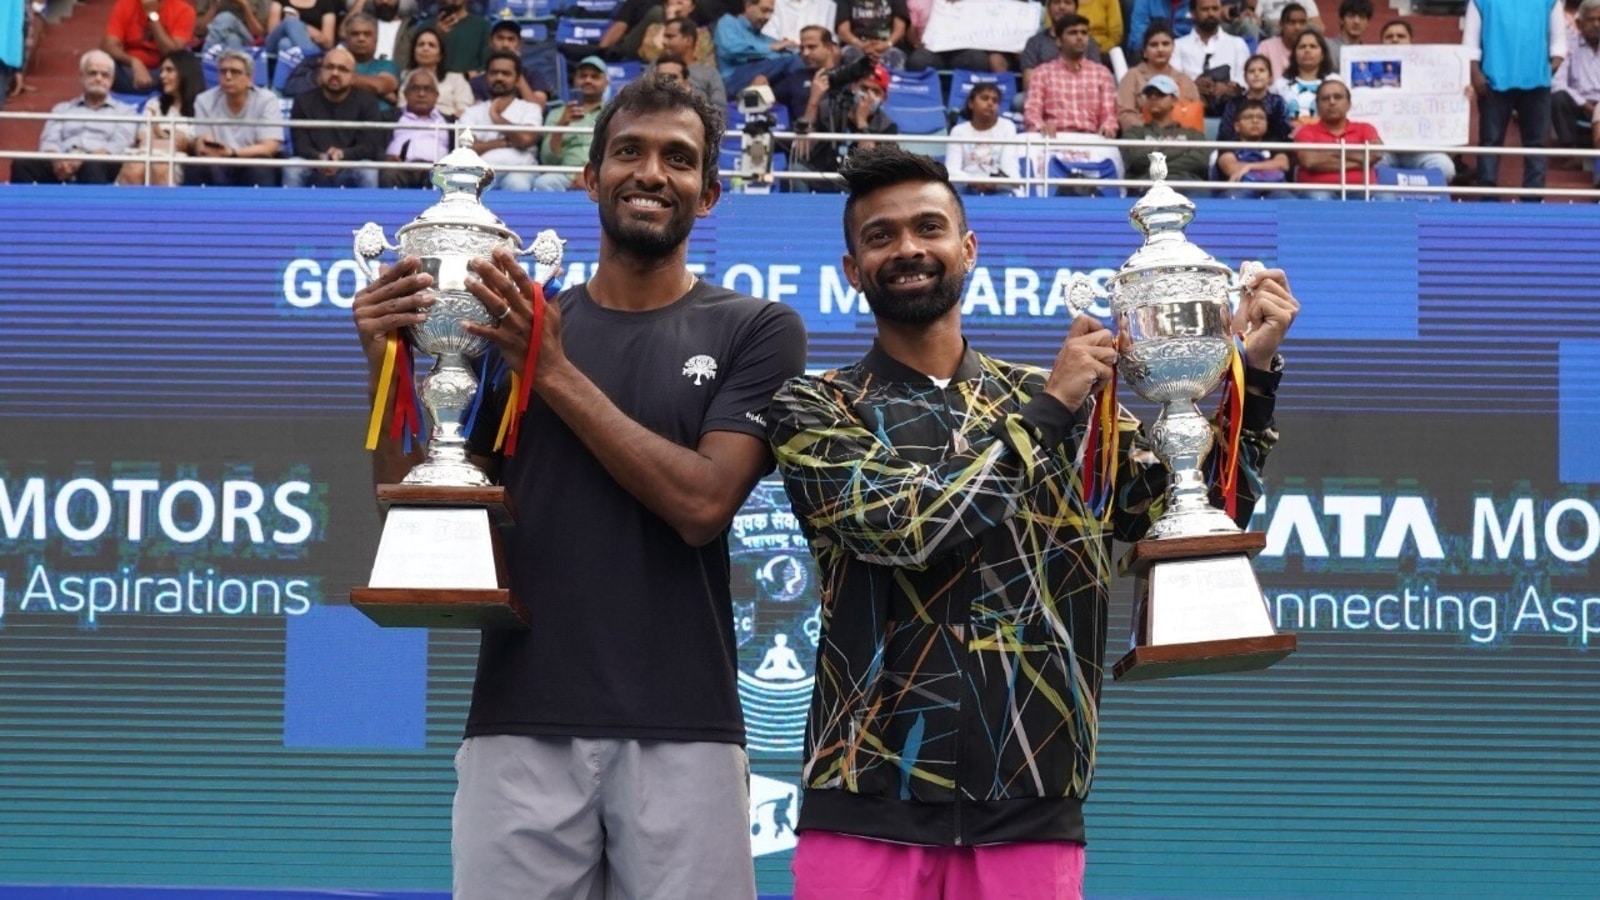 ‘Onwards and upwards’ aiming Jeevan, Sriram Balaji hope to make French Open cut after exceptional Tata Open run